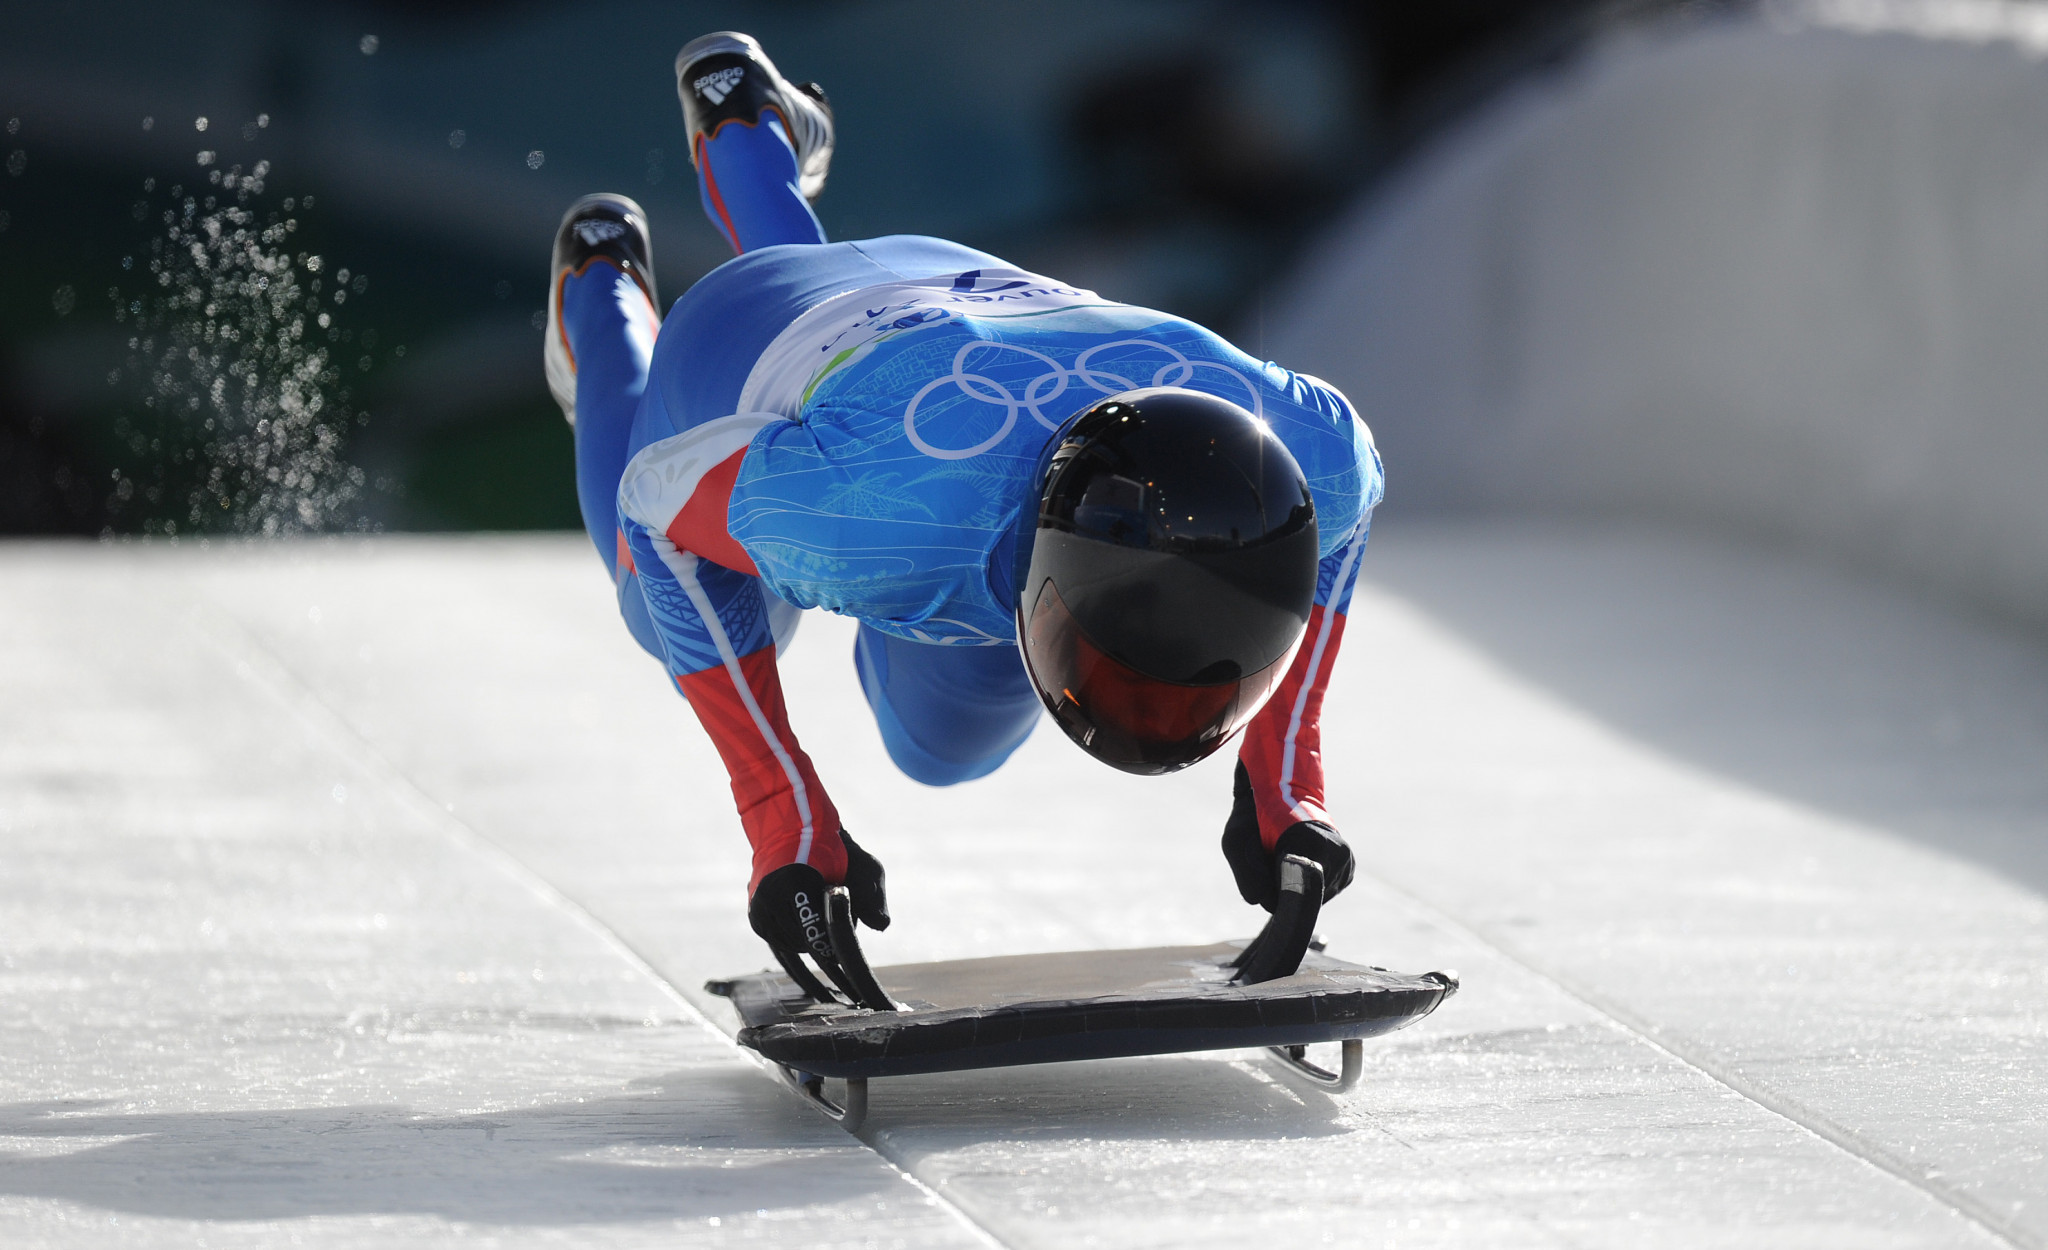 Olympic skeleton champion Alexander Tretiakov is among the athletes from Russia barred from competing at Pyeongchang 2018 following an unsuccessful appeal to the Court of Arbitration for Sport ©Getty Images